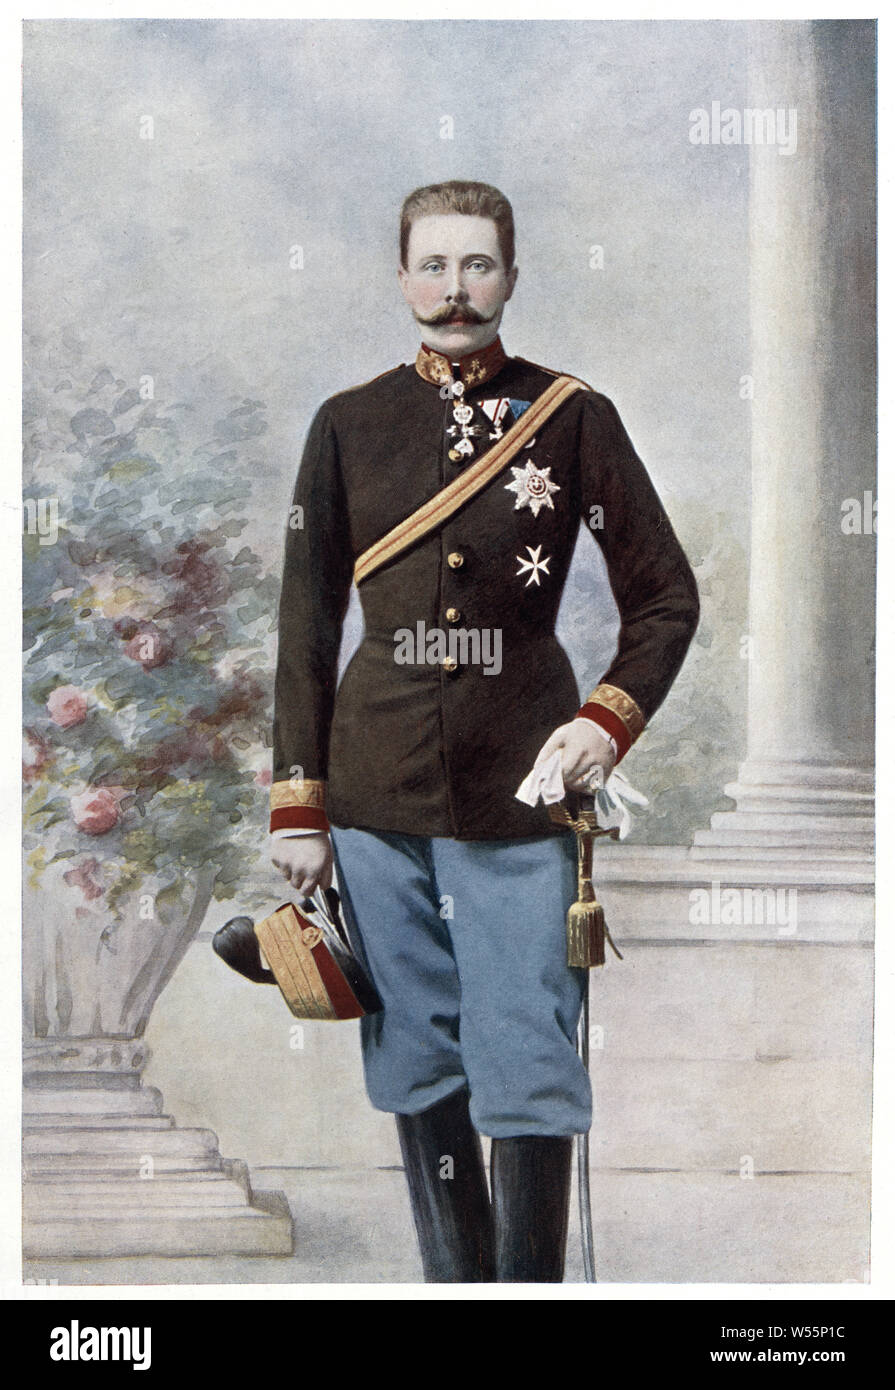 Archduke Franz Ferdinand of Austria a member of the imperial Habsburg dynasty, and from 1896 until his death the heir presumptive (Thronfolger) to the Austro-Hungarian throne.[ Stock Photo